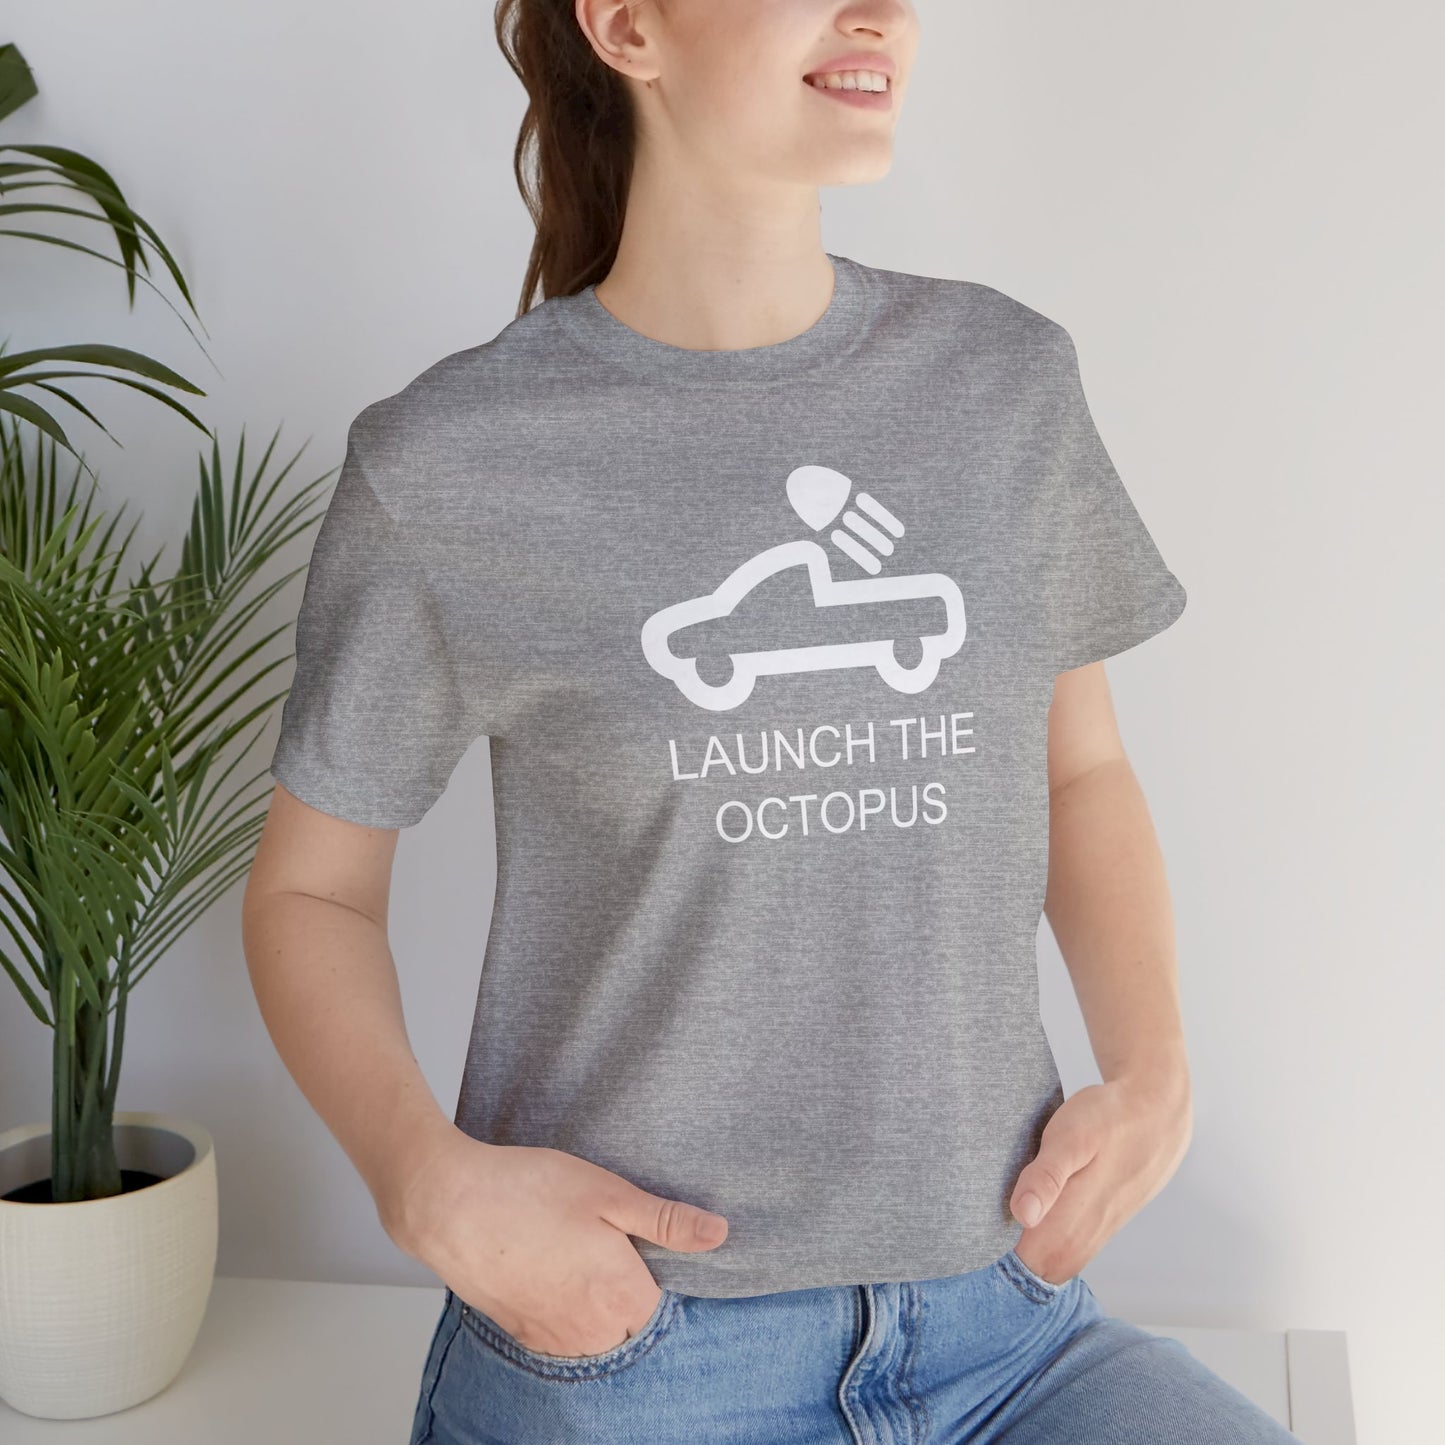 Launch the Octopus: UX T-Shirt